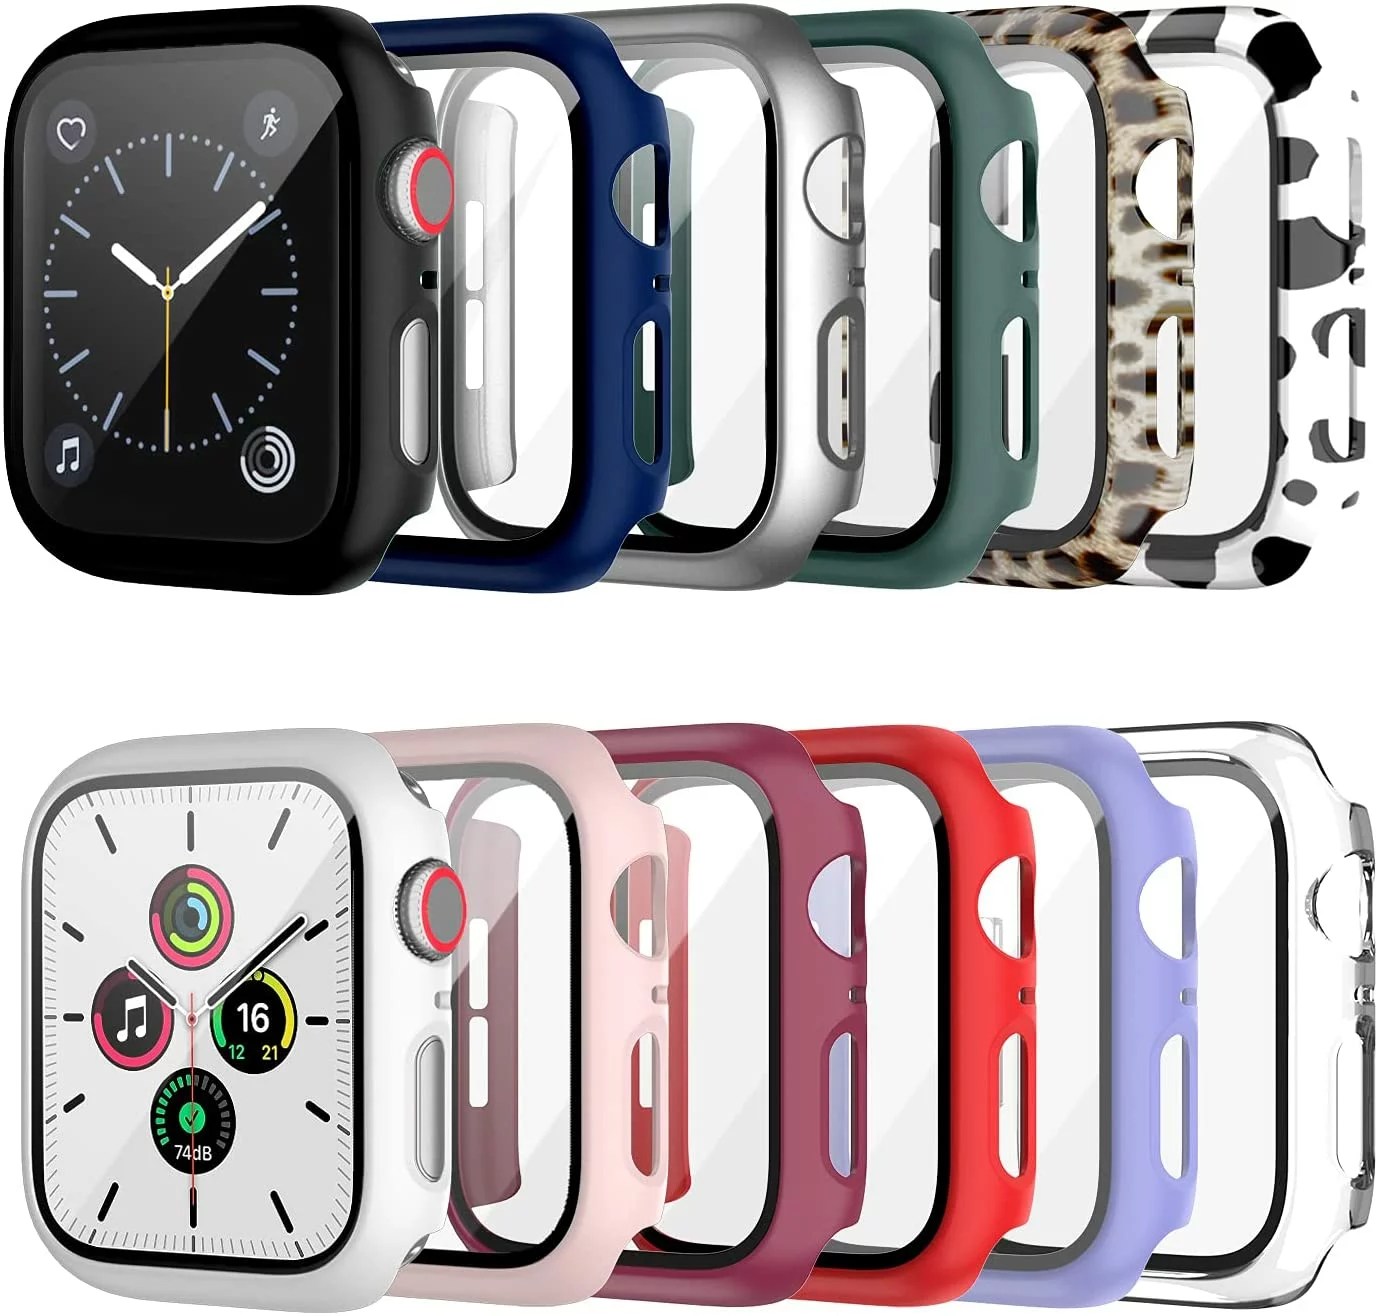 apple watch protector multi pack